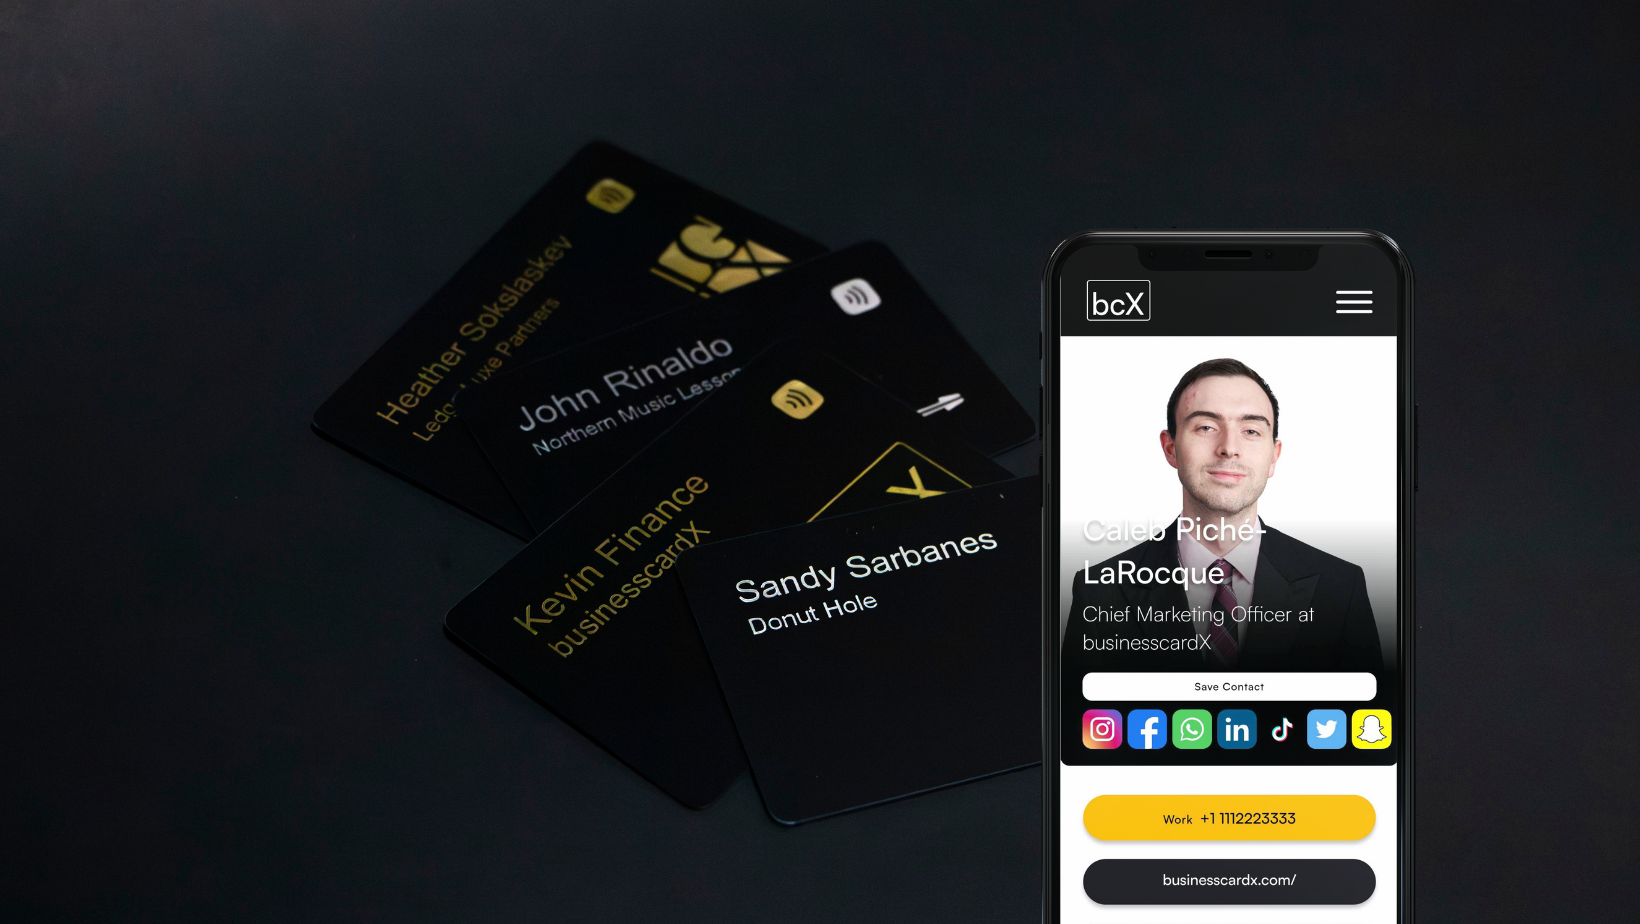 Experience the Power of a Smart Business Card